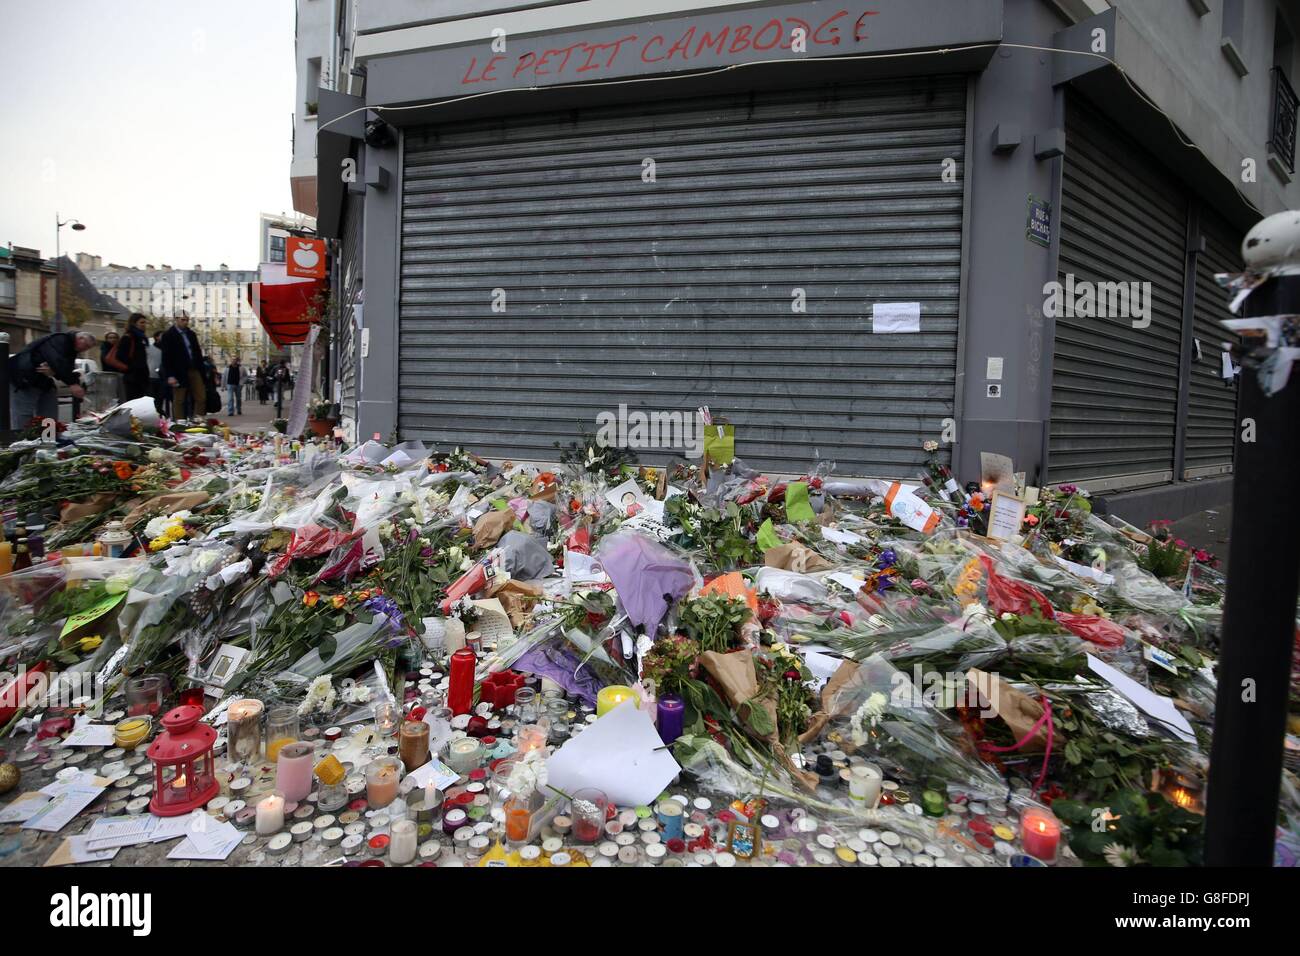 Tributes continue to be left at the Le Petit Cambodge in Paris following the terrorist attacks on Friday evening. Stock Photo